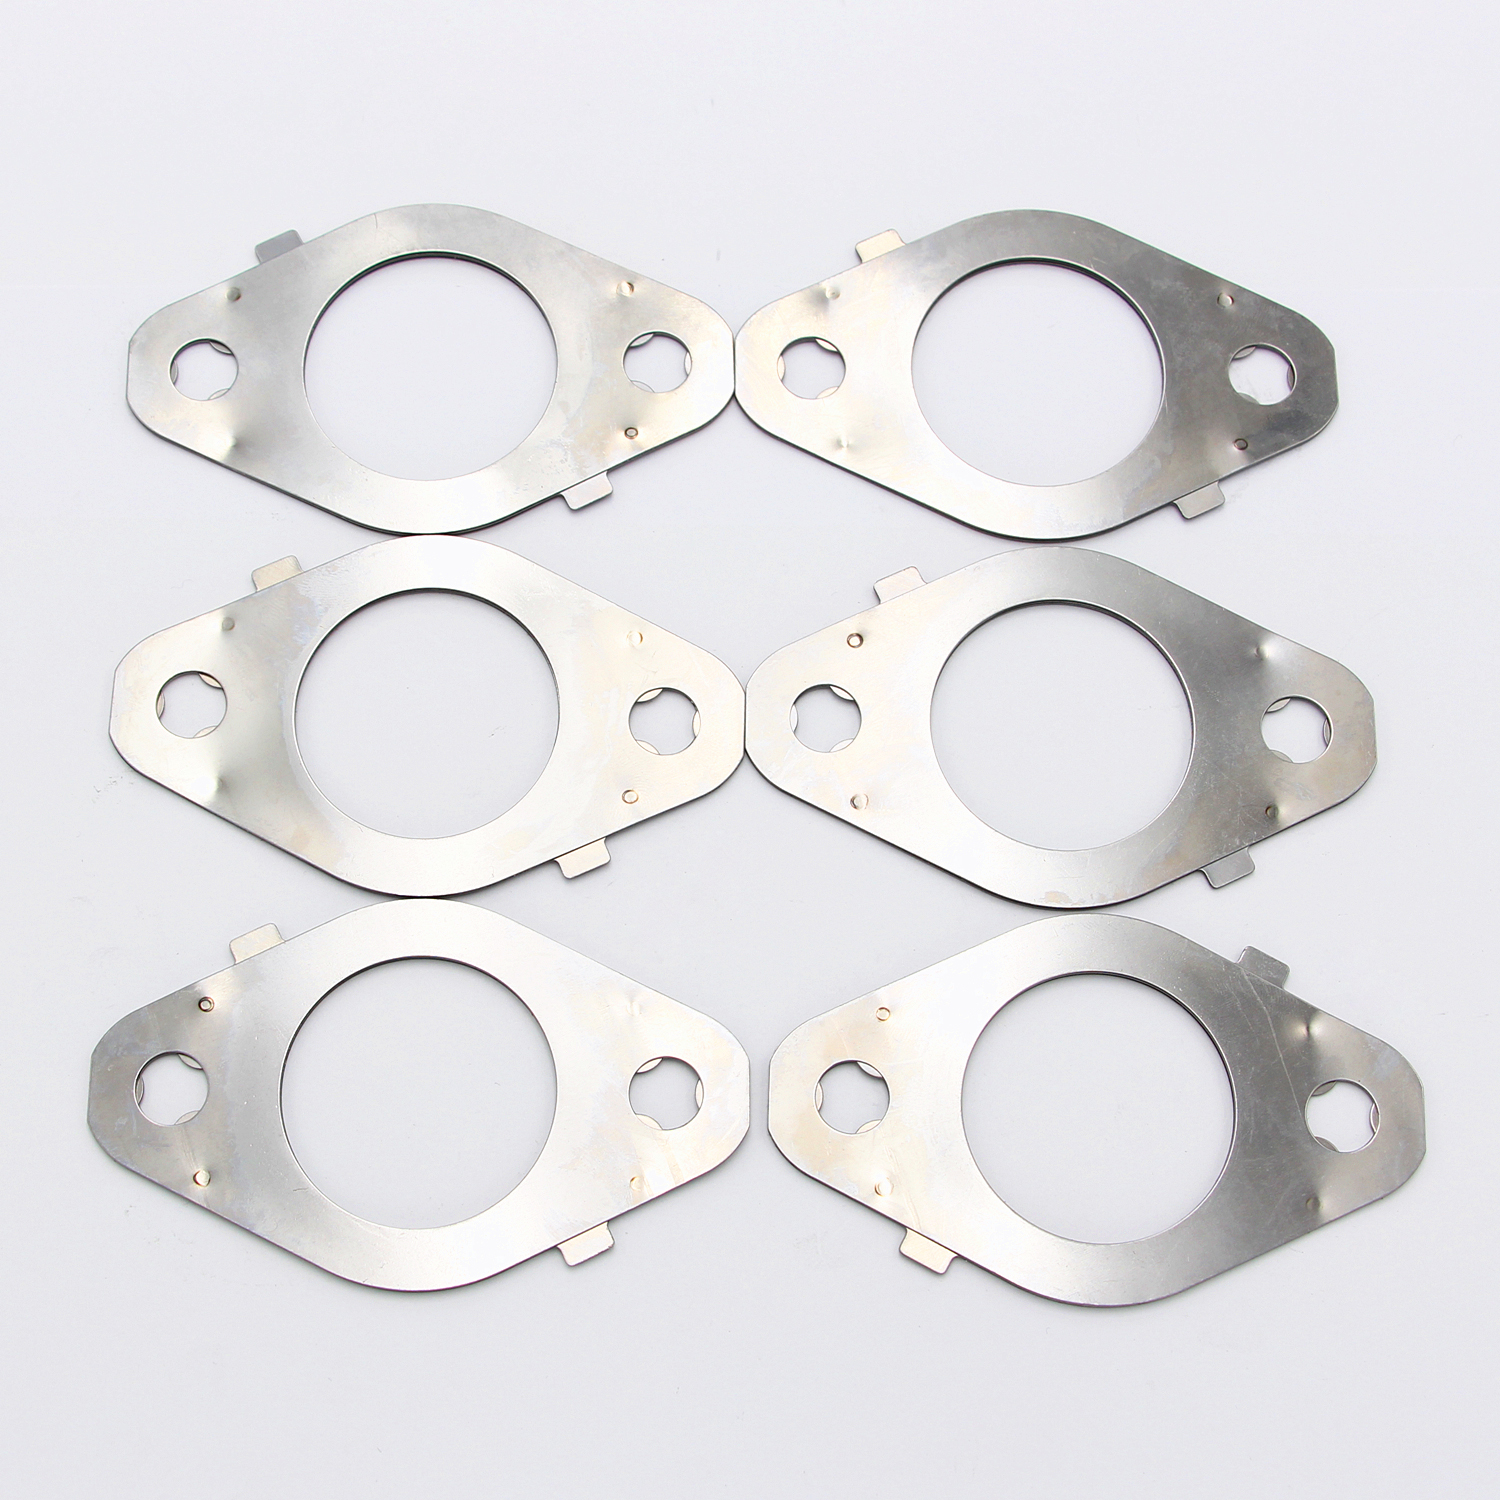 6Pcs New Exhaust Manifold Gaskets for 1998-2007 Dodge Cummins 5.9L 6.7L 5.9 Cummins Exhaust Manifold Gasket Replacement